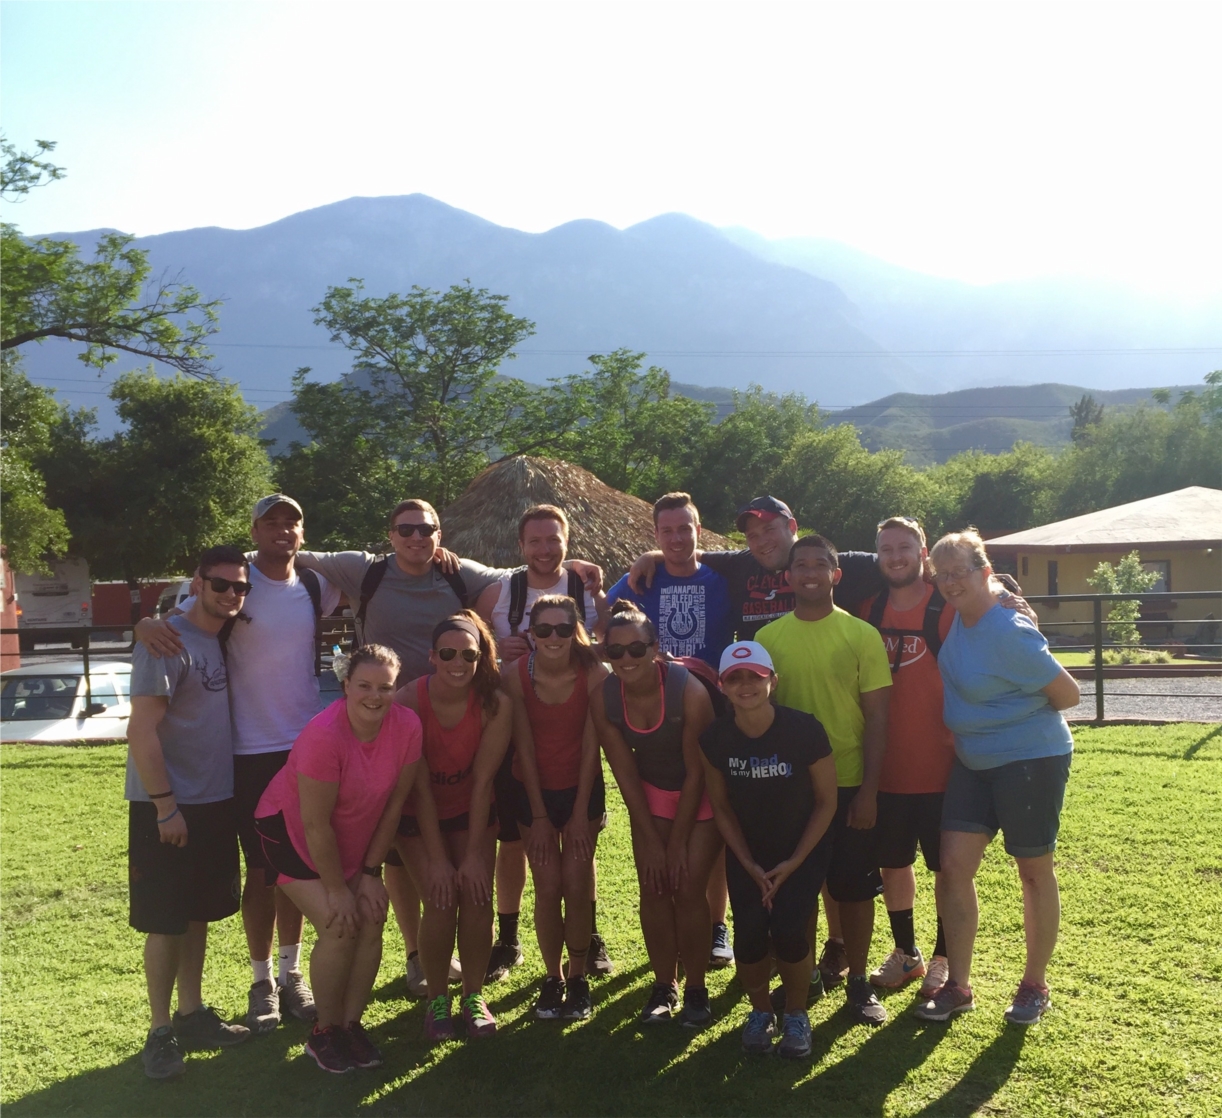 Impacting Tomorrow, TaleMed's community action platform, supports families, children, and communities - locally and globally - with service projects and financial support. Here, 14 TaleMed employees are on a mission trip to Monterrey, Mexico with Cincinnati-based Back2Back Ministries.